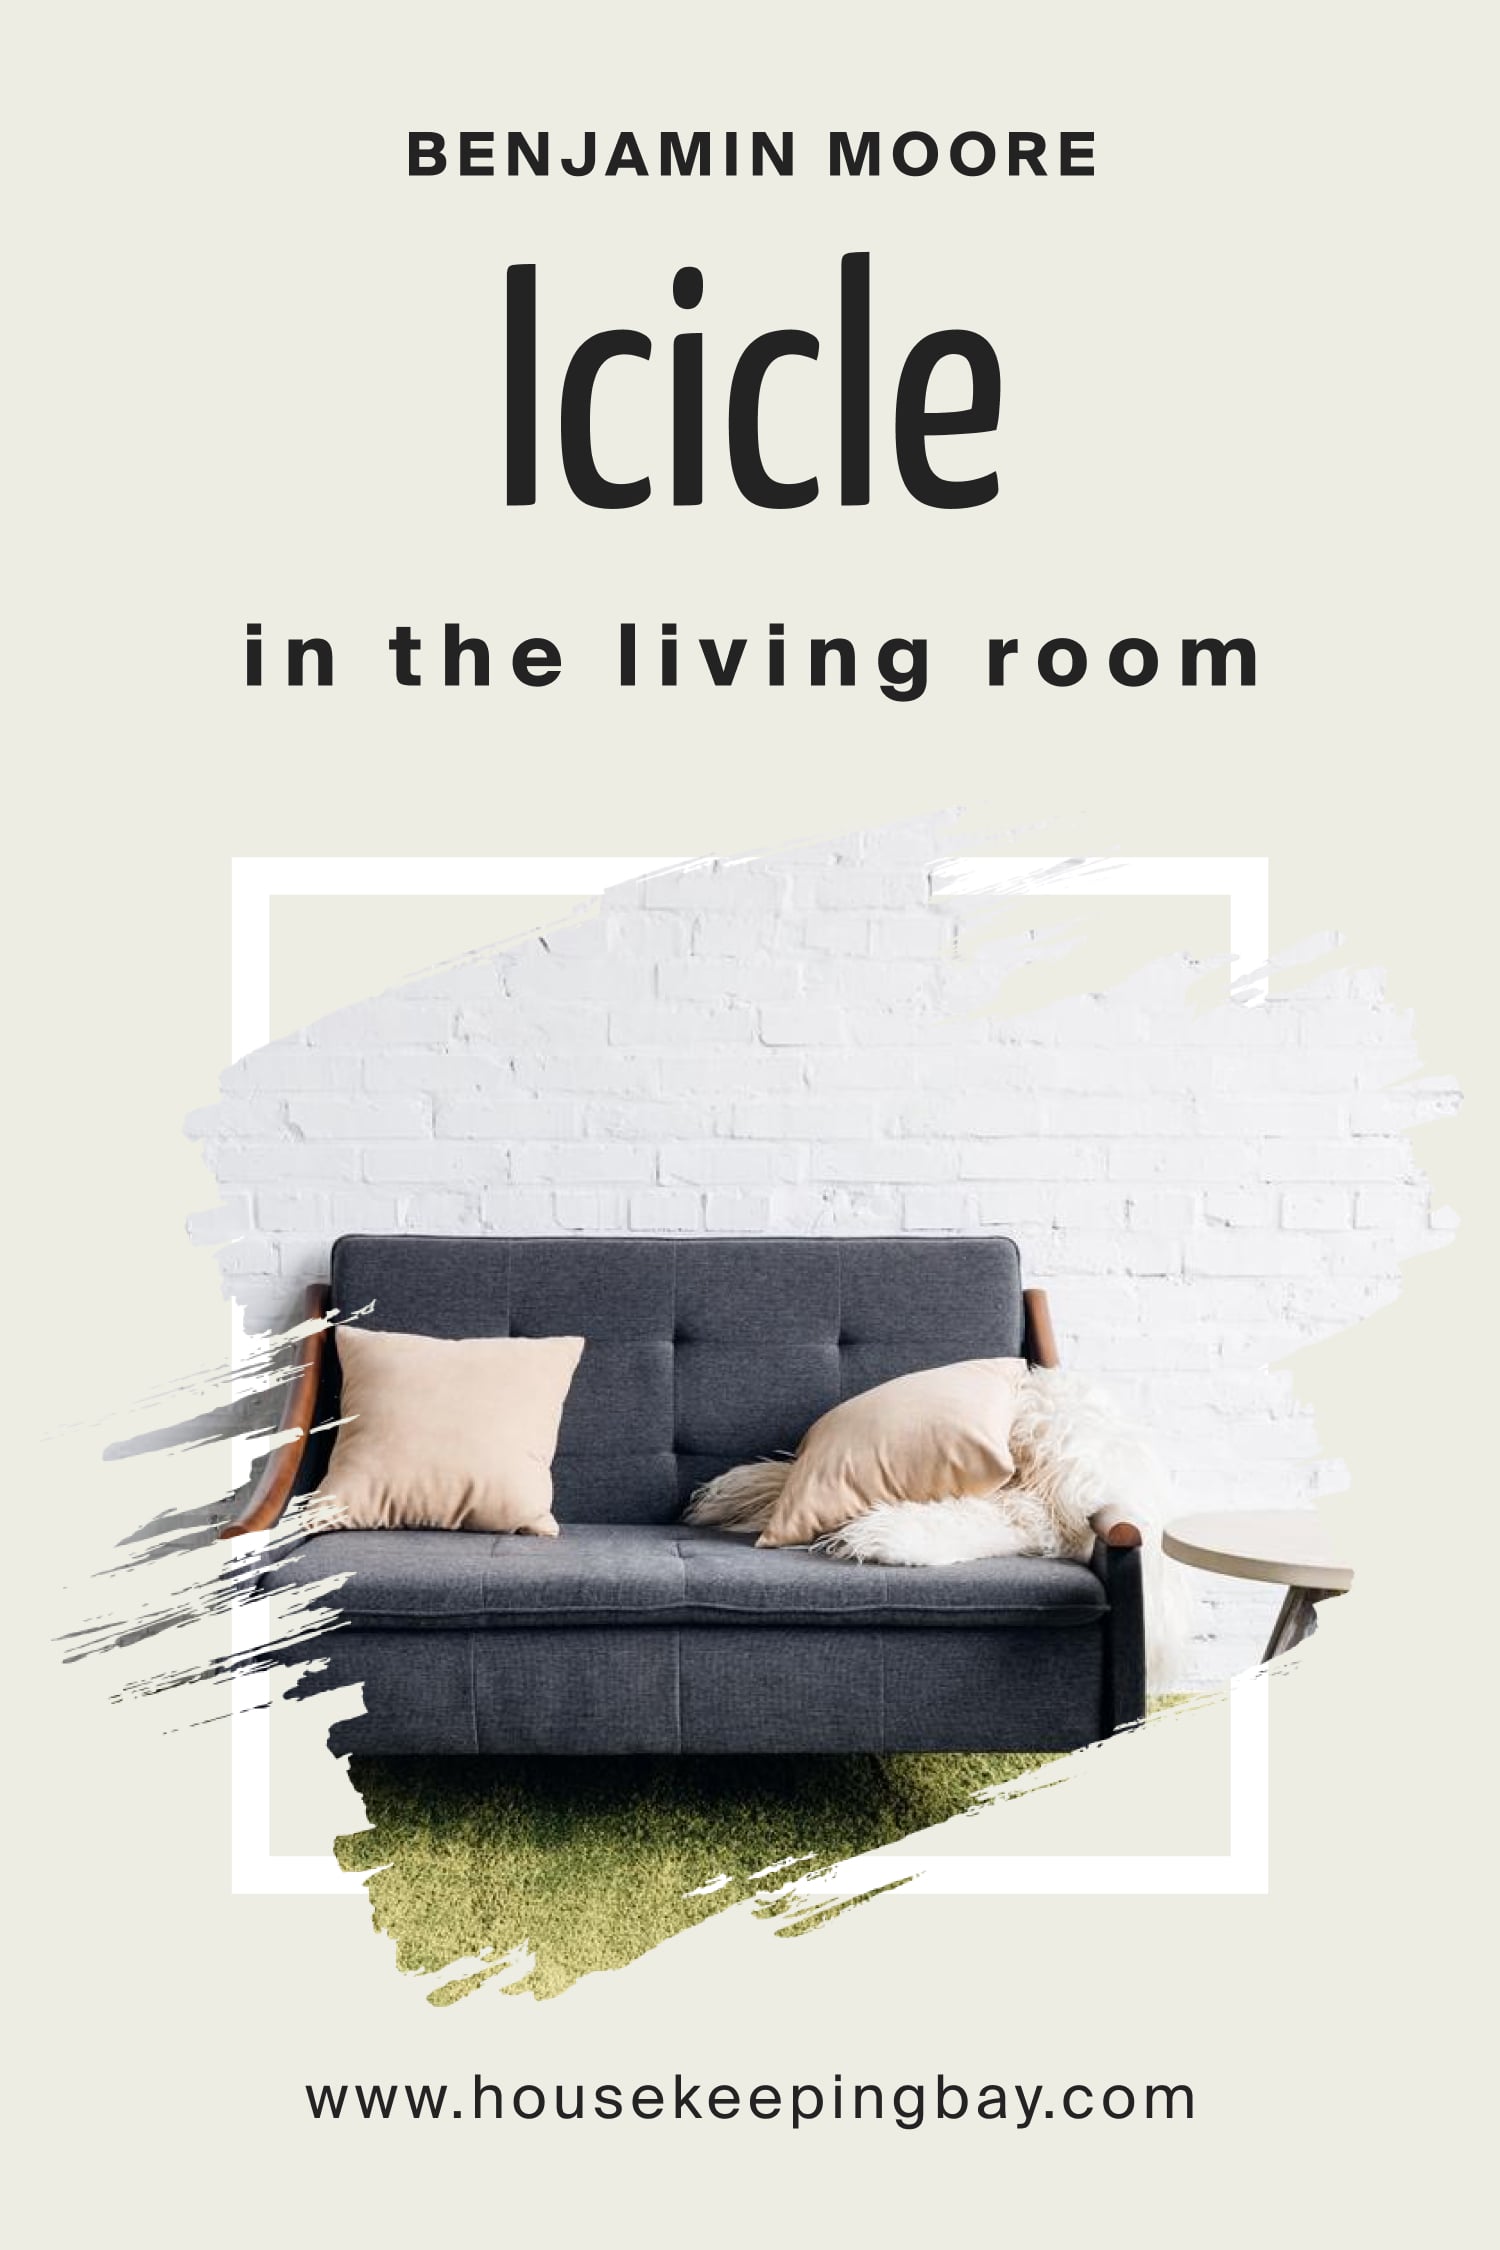 Benjamin Moore. Icicle 2142 70 in the living Room